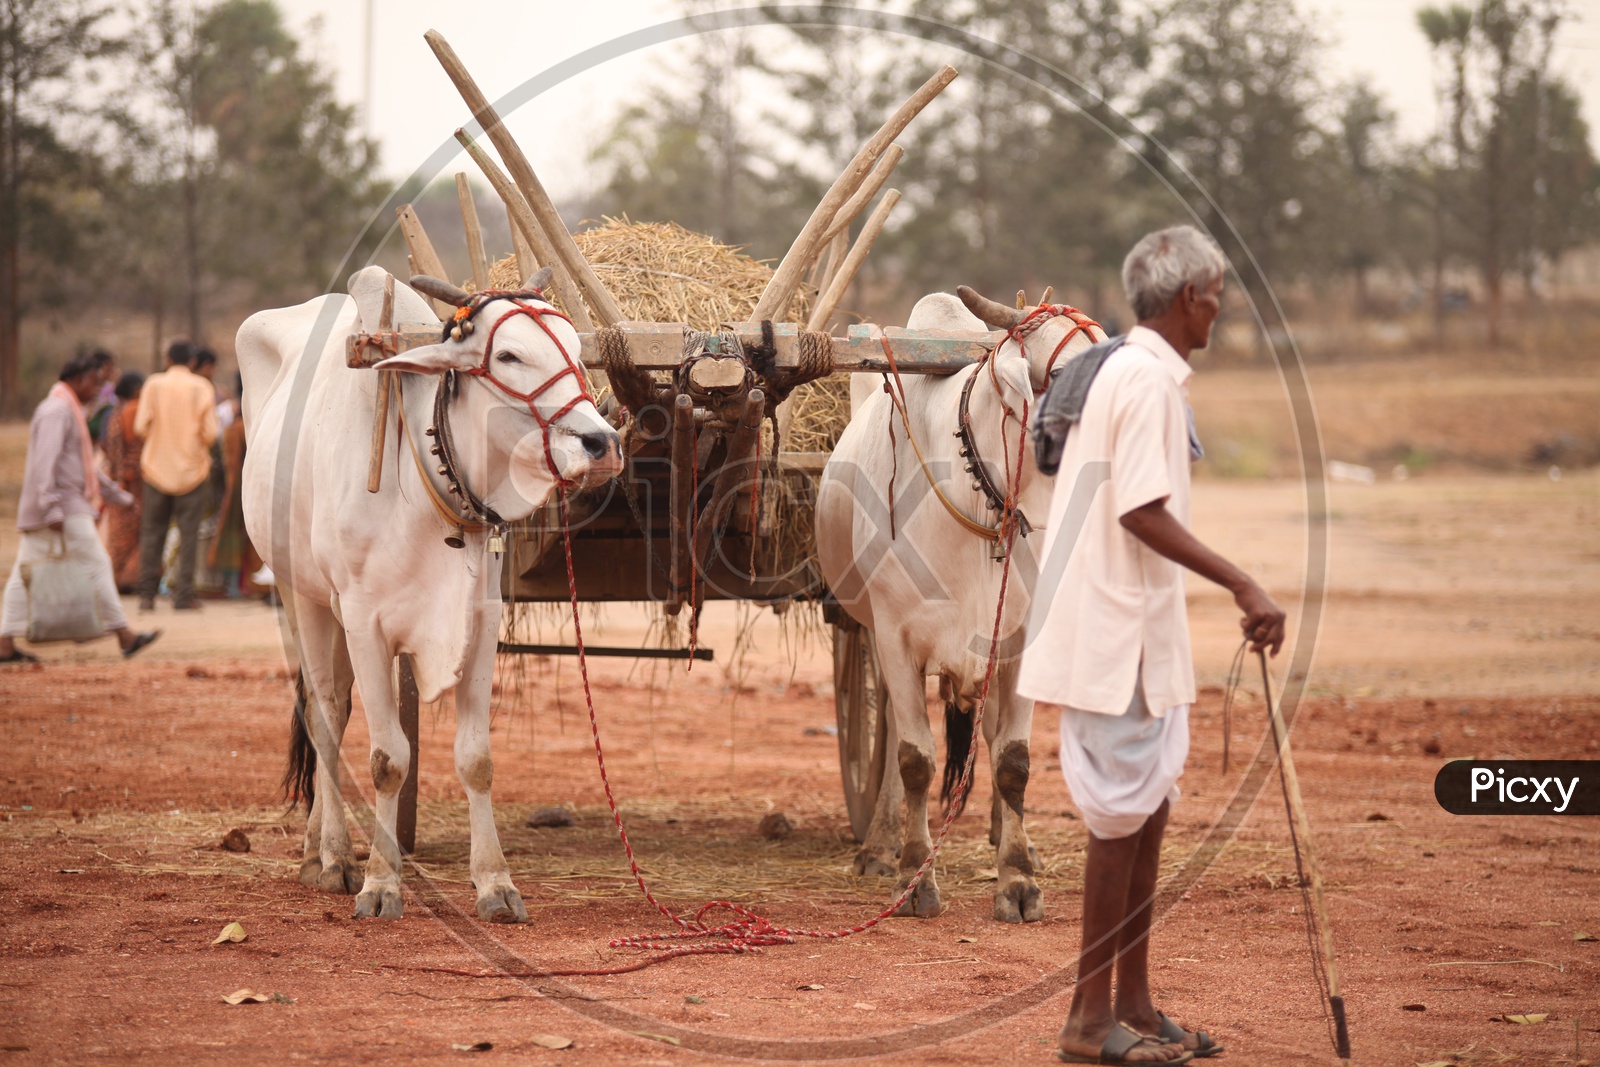 An Indian Old Man With His Bullock cart In Rural Villages in India